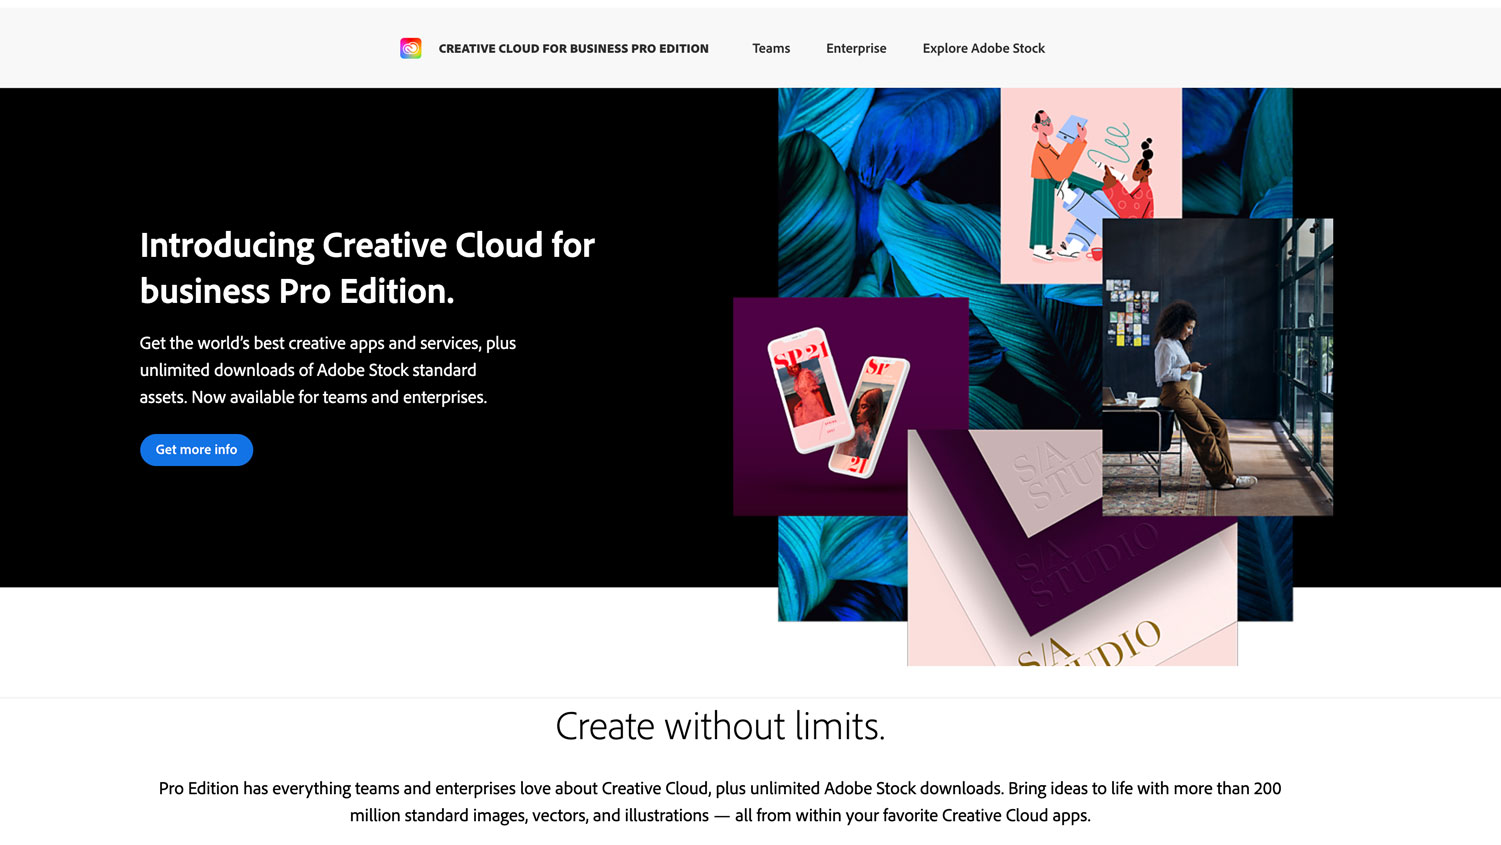 Find and use Adobe Stock assets in Creative Cloud apps